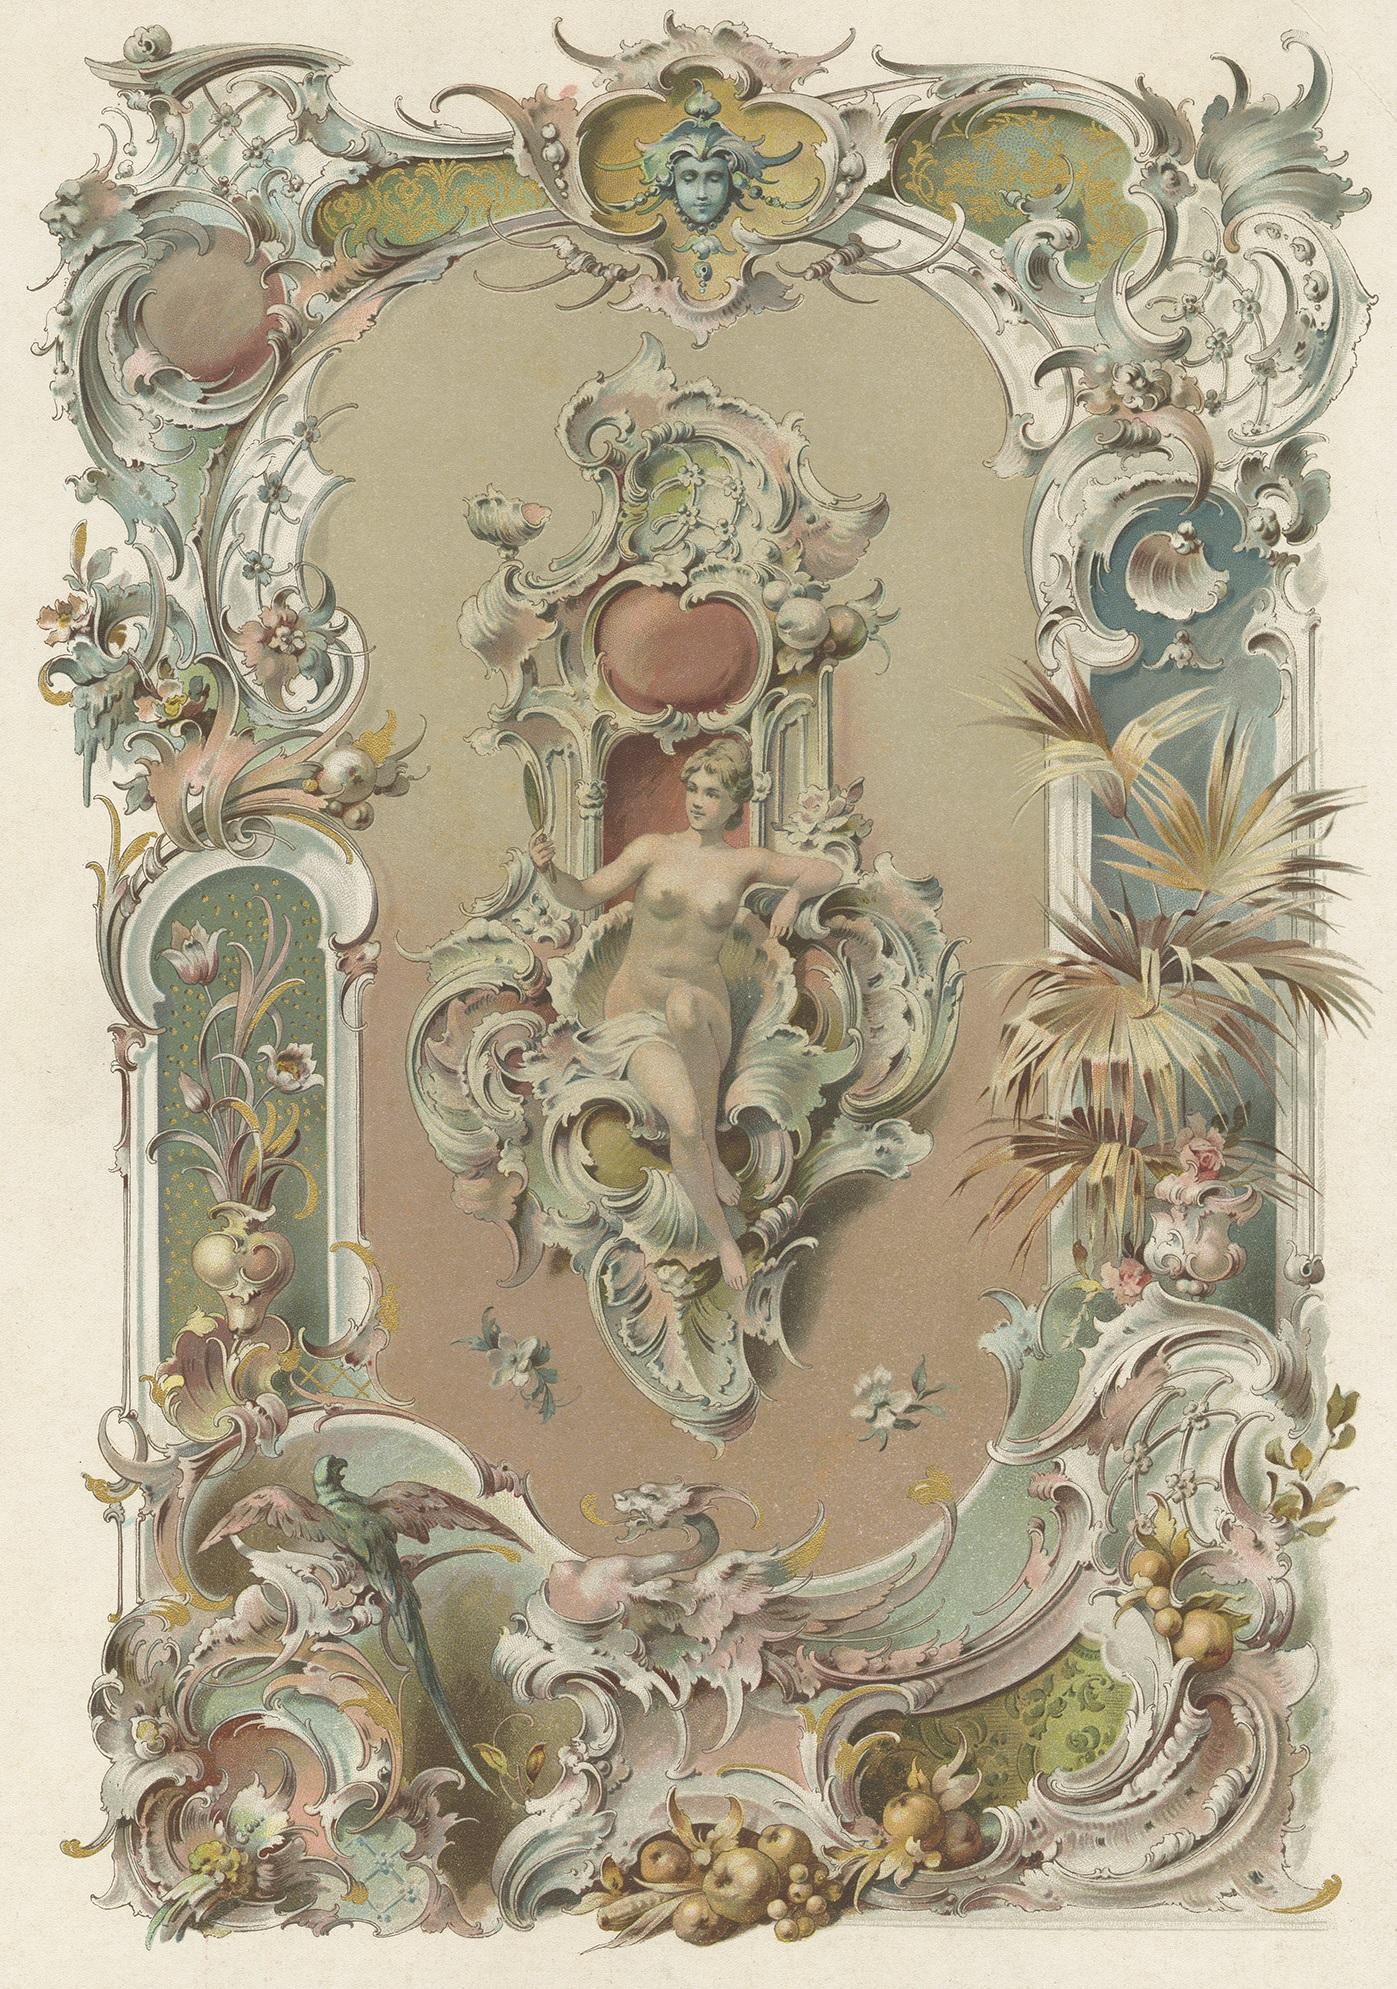 Decorative print depicting a woman with mirror surrounded by a decorated border. Source unknown, to be determined.